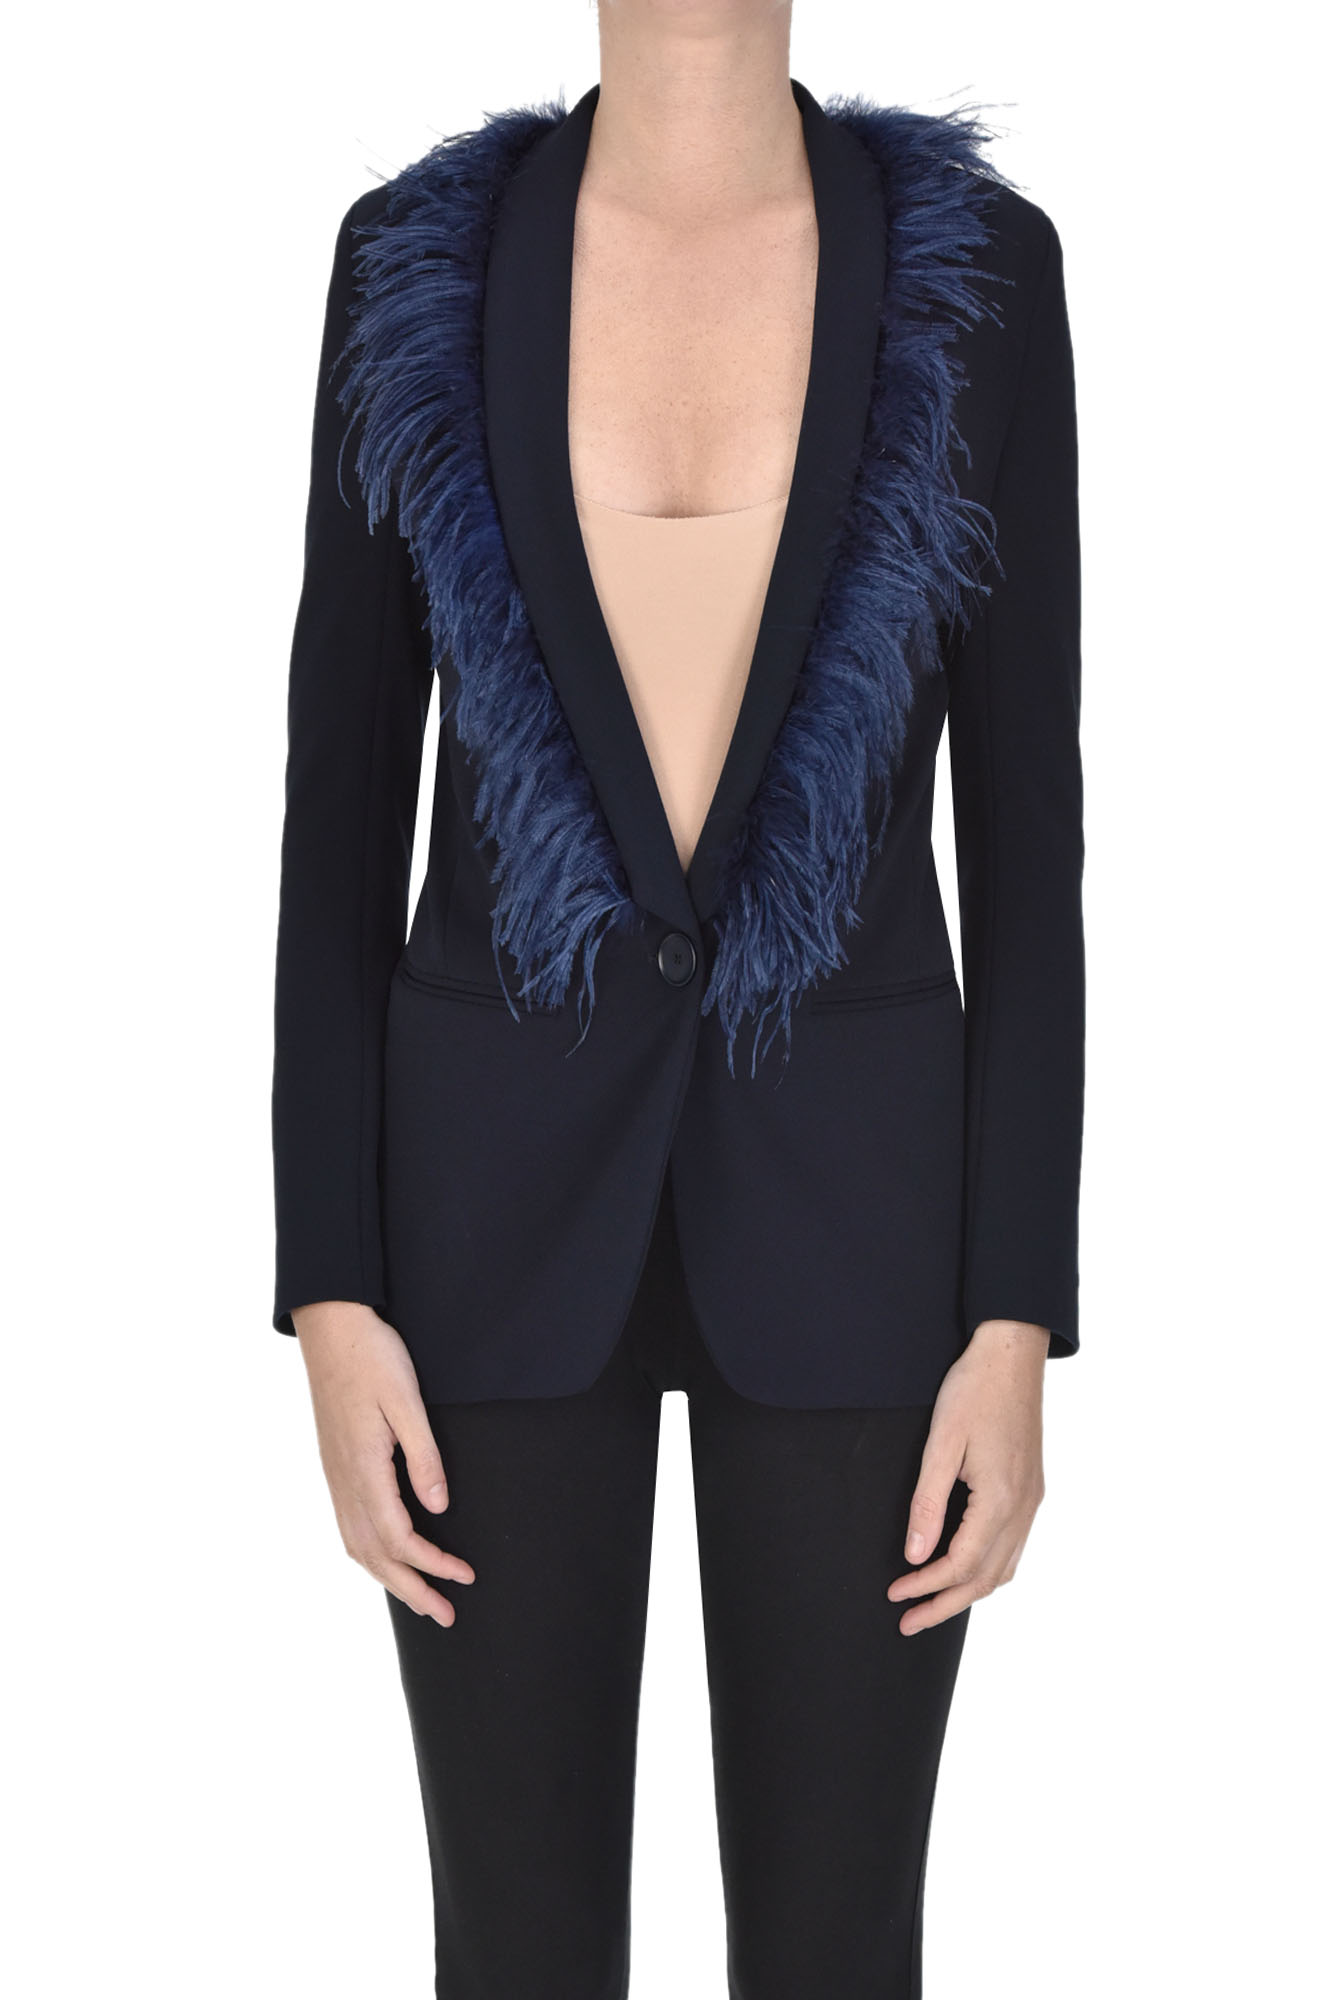 Merci Blazer With Feathers In Navy Blue